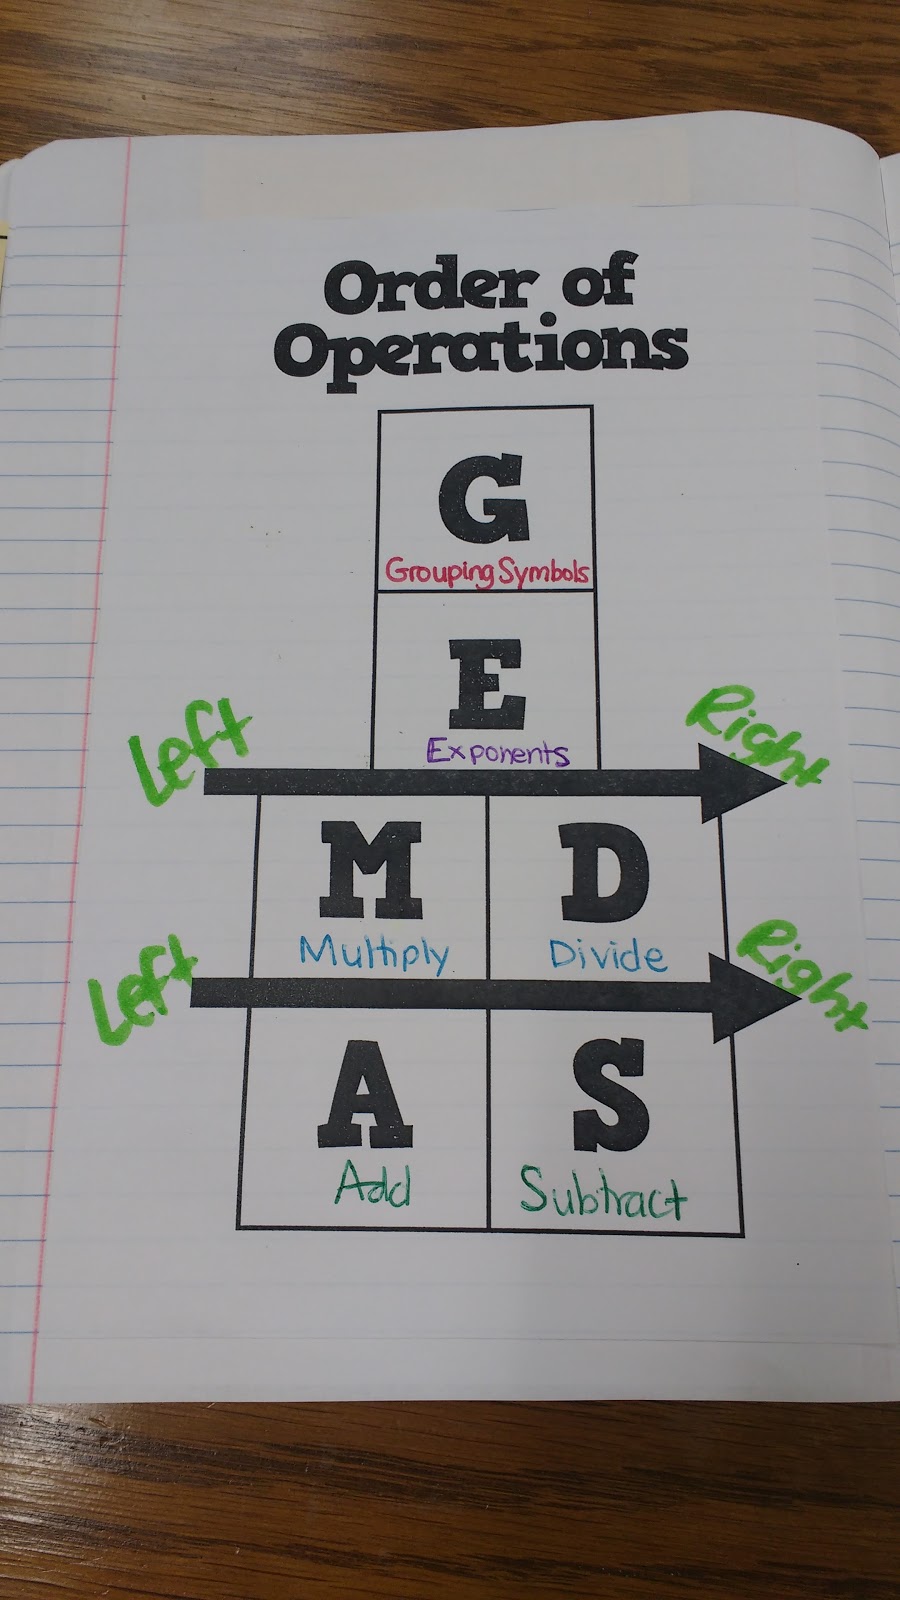 order of operations graphic organizer with grouping symbols